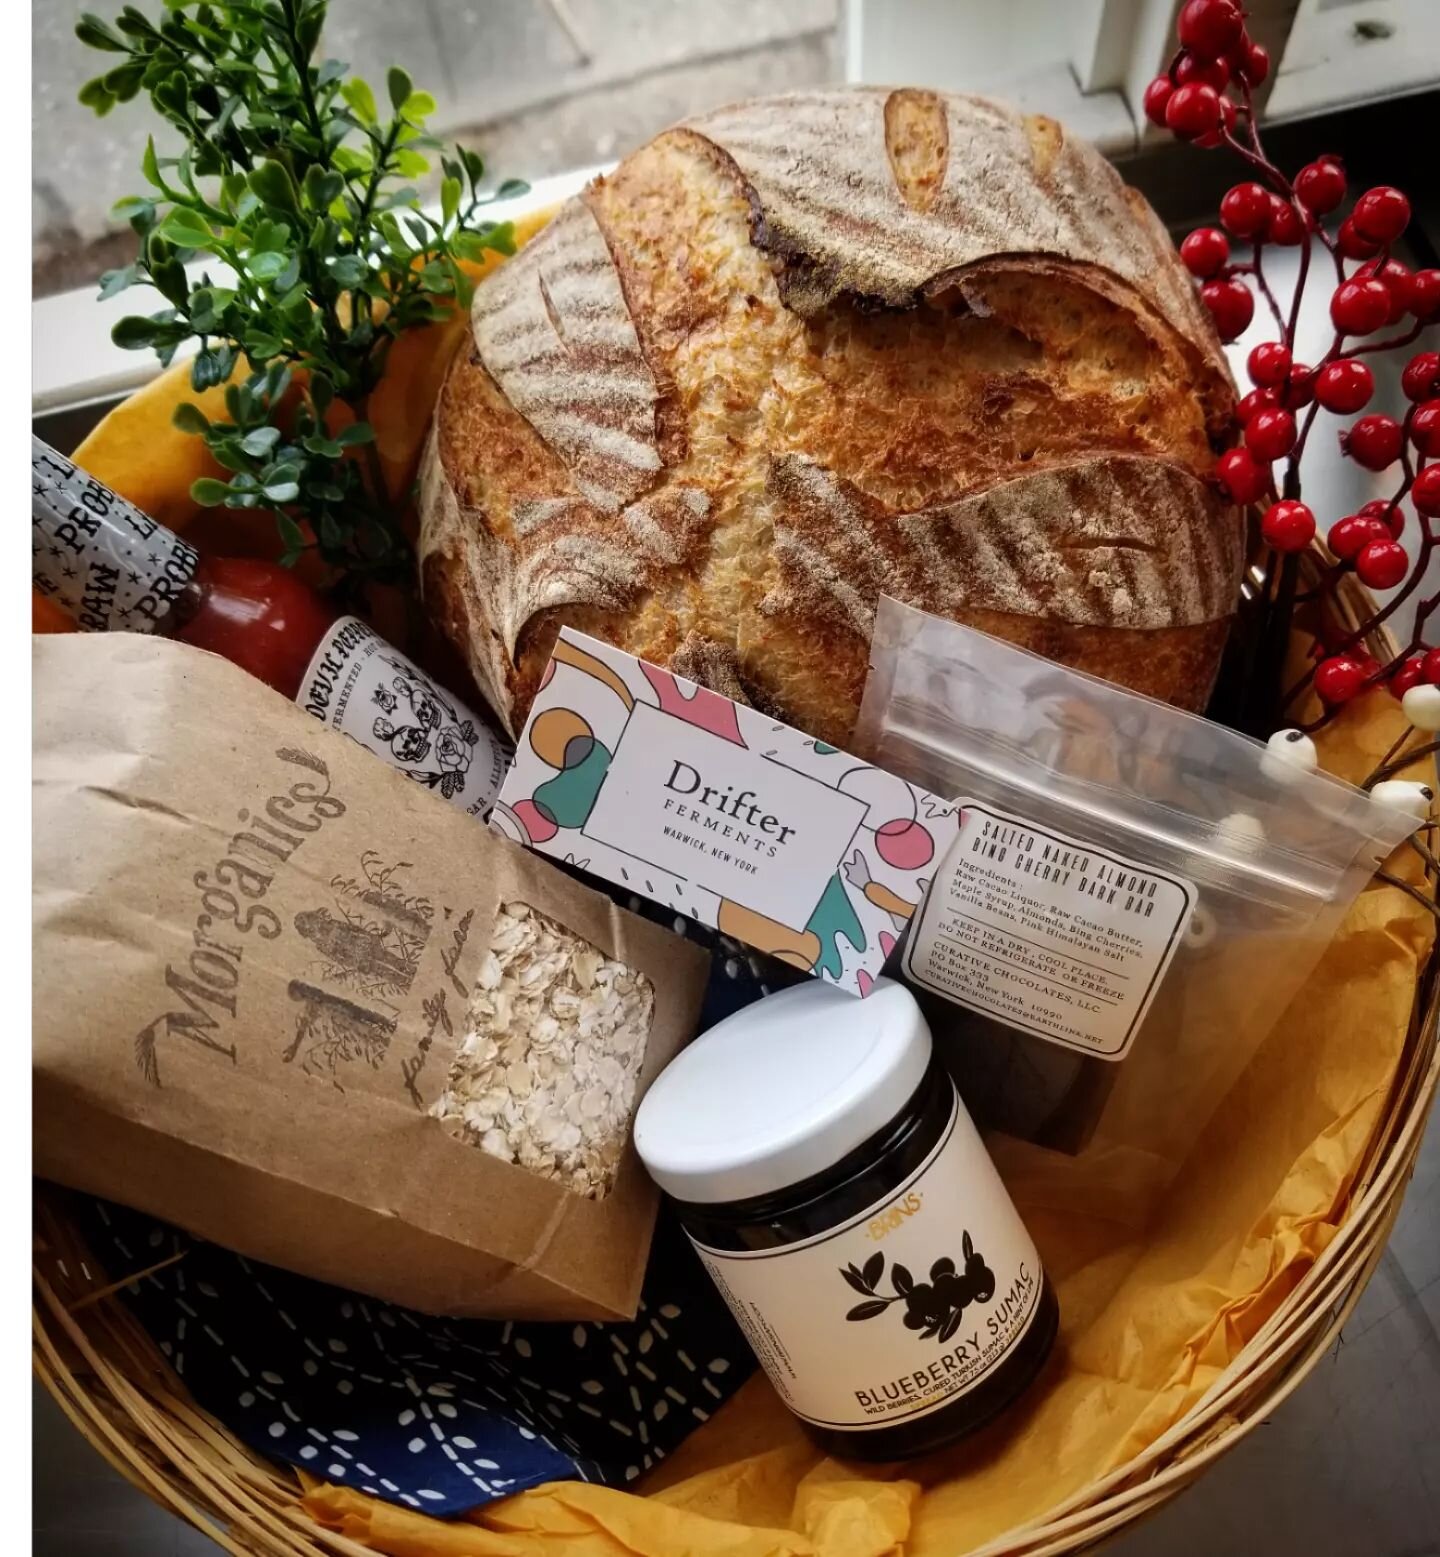 Yule gift baskets are now available daily until Christmas Eve at noon. This sample basket is $60 and includes our oat porridge einkorn sourdough, a jar of Blueberry Sumac @brinsjam, @poordevilpepperco Smoke Shifter, @curativechocolates pomegranate ca